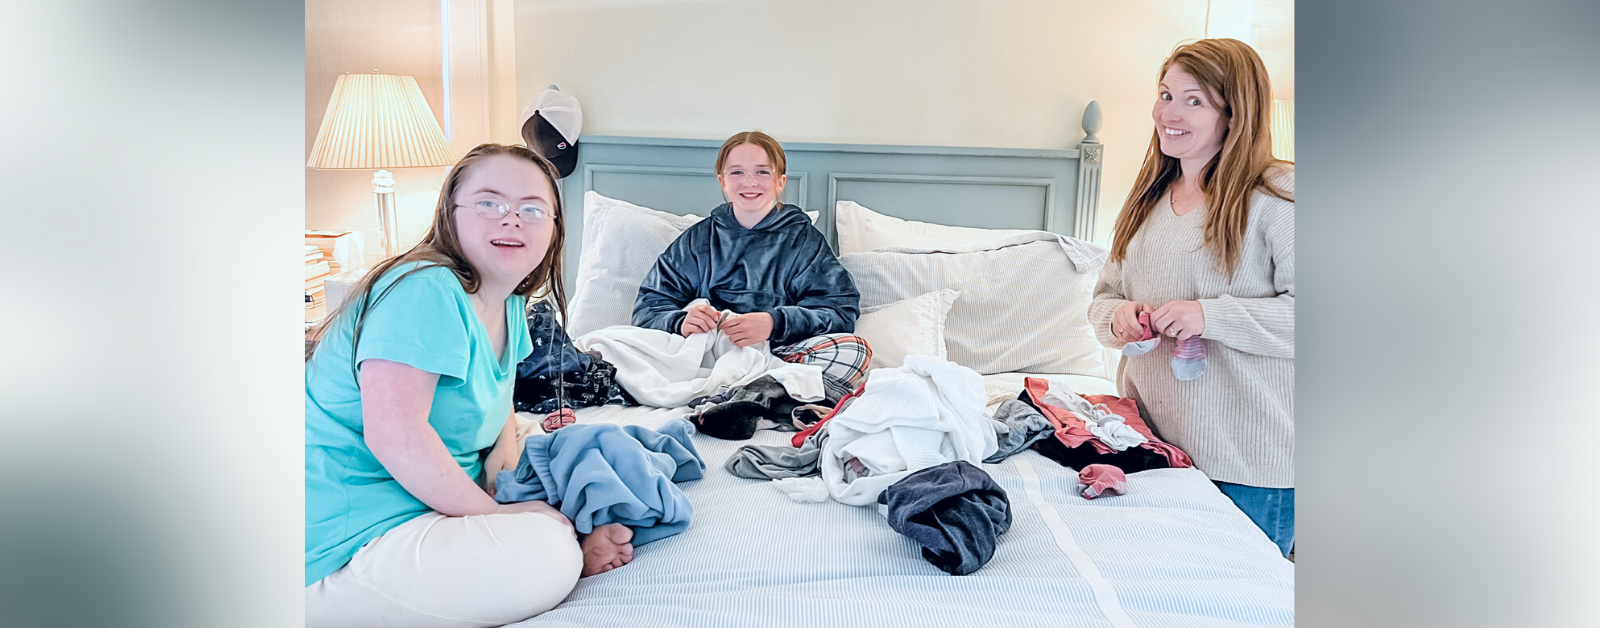 Penny and Marilee sit on a white bed and Amy Julia stands next to it. They are folding clothes and smiling at the camera.